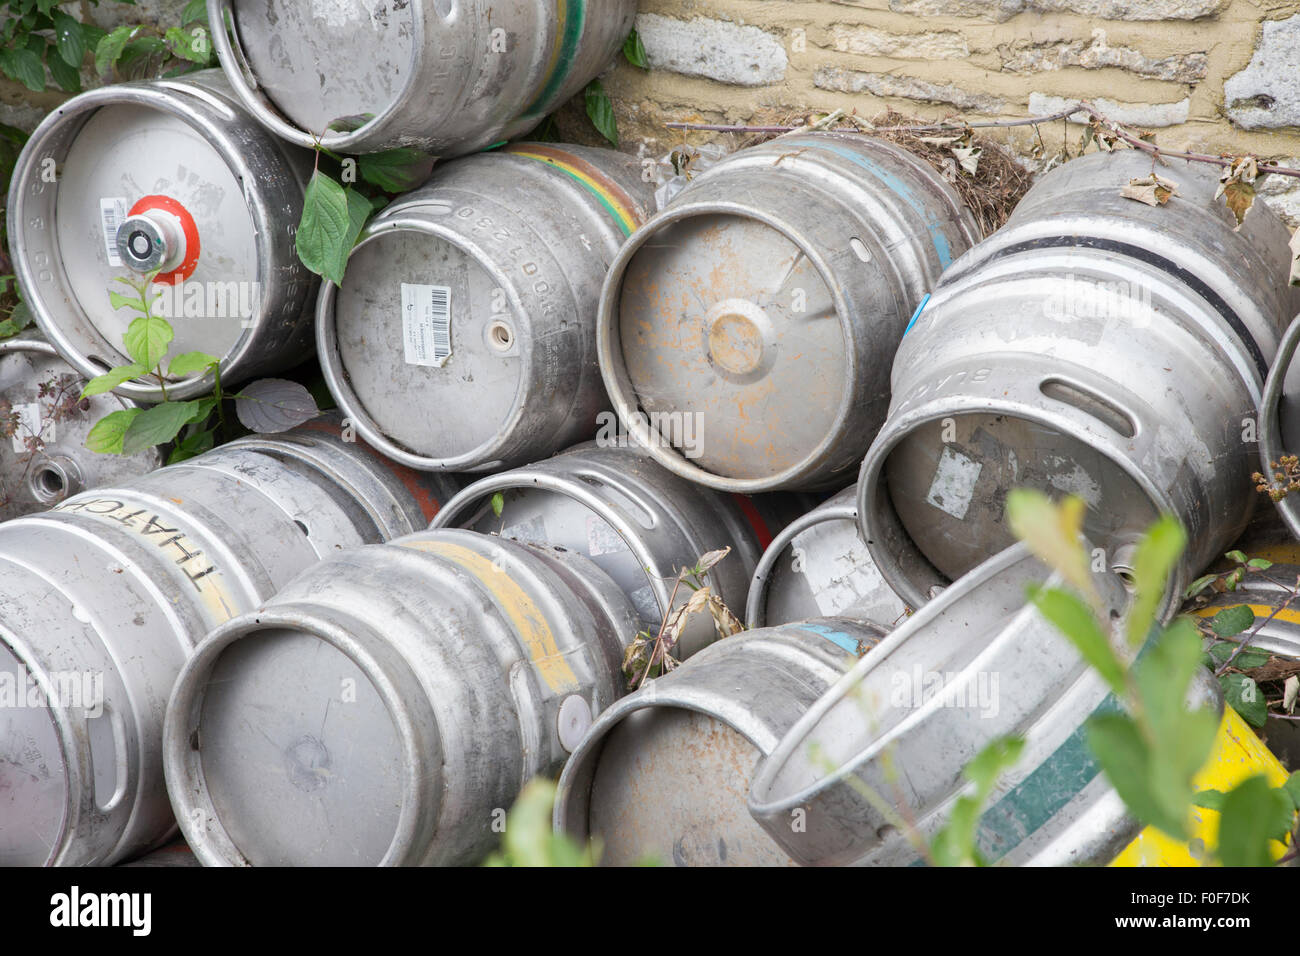 Stainless steel beer kegs outside a public house, England, UK Stock Photo